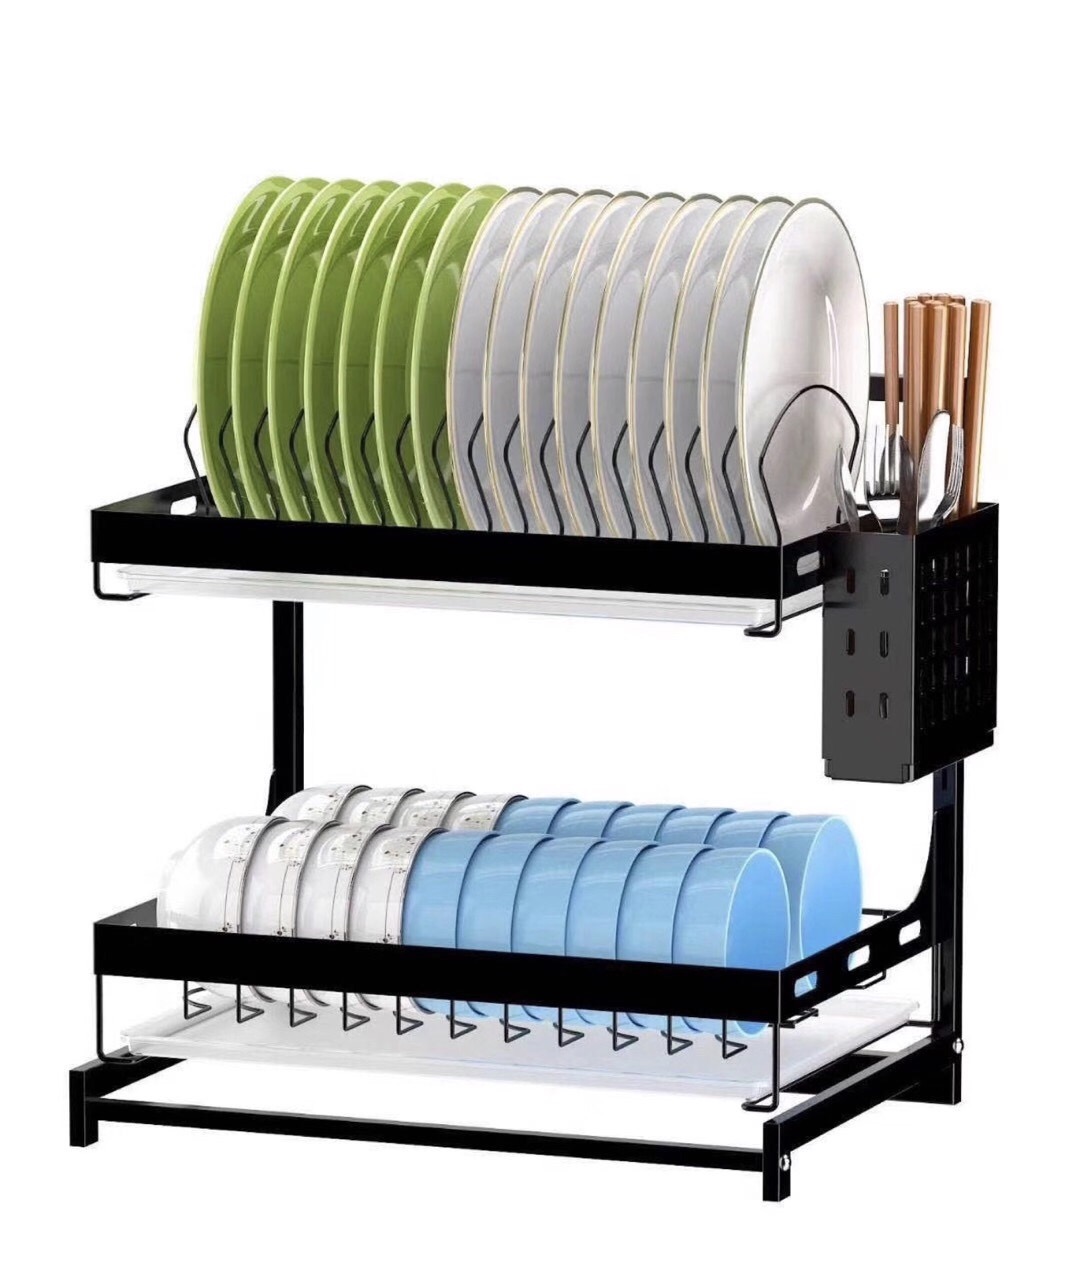 Featured image of post Dish Rack For Sale Philippines : Check out our dish rack selection for the very best in unique or custom, handmade pieces from our kitchen storage shops.